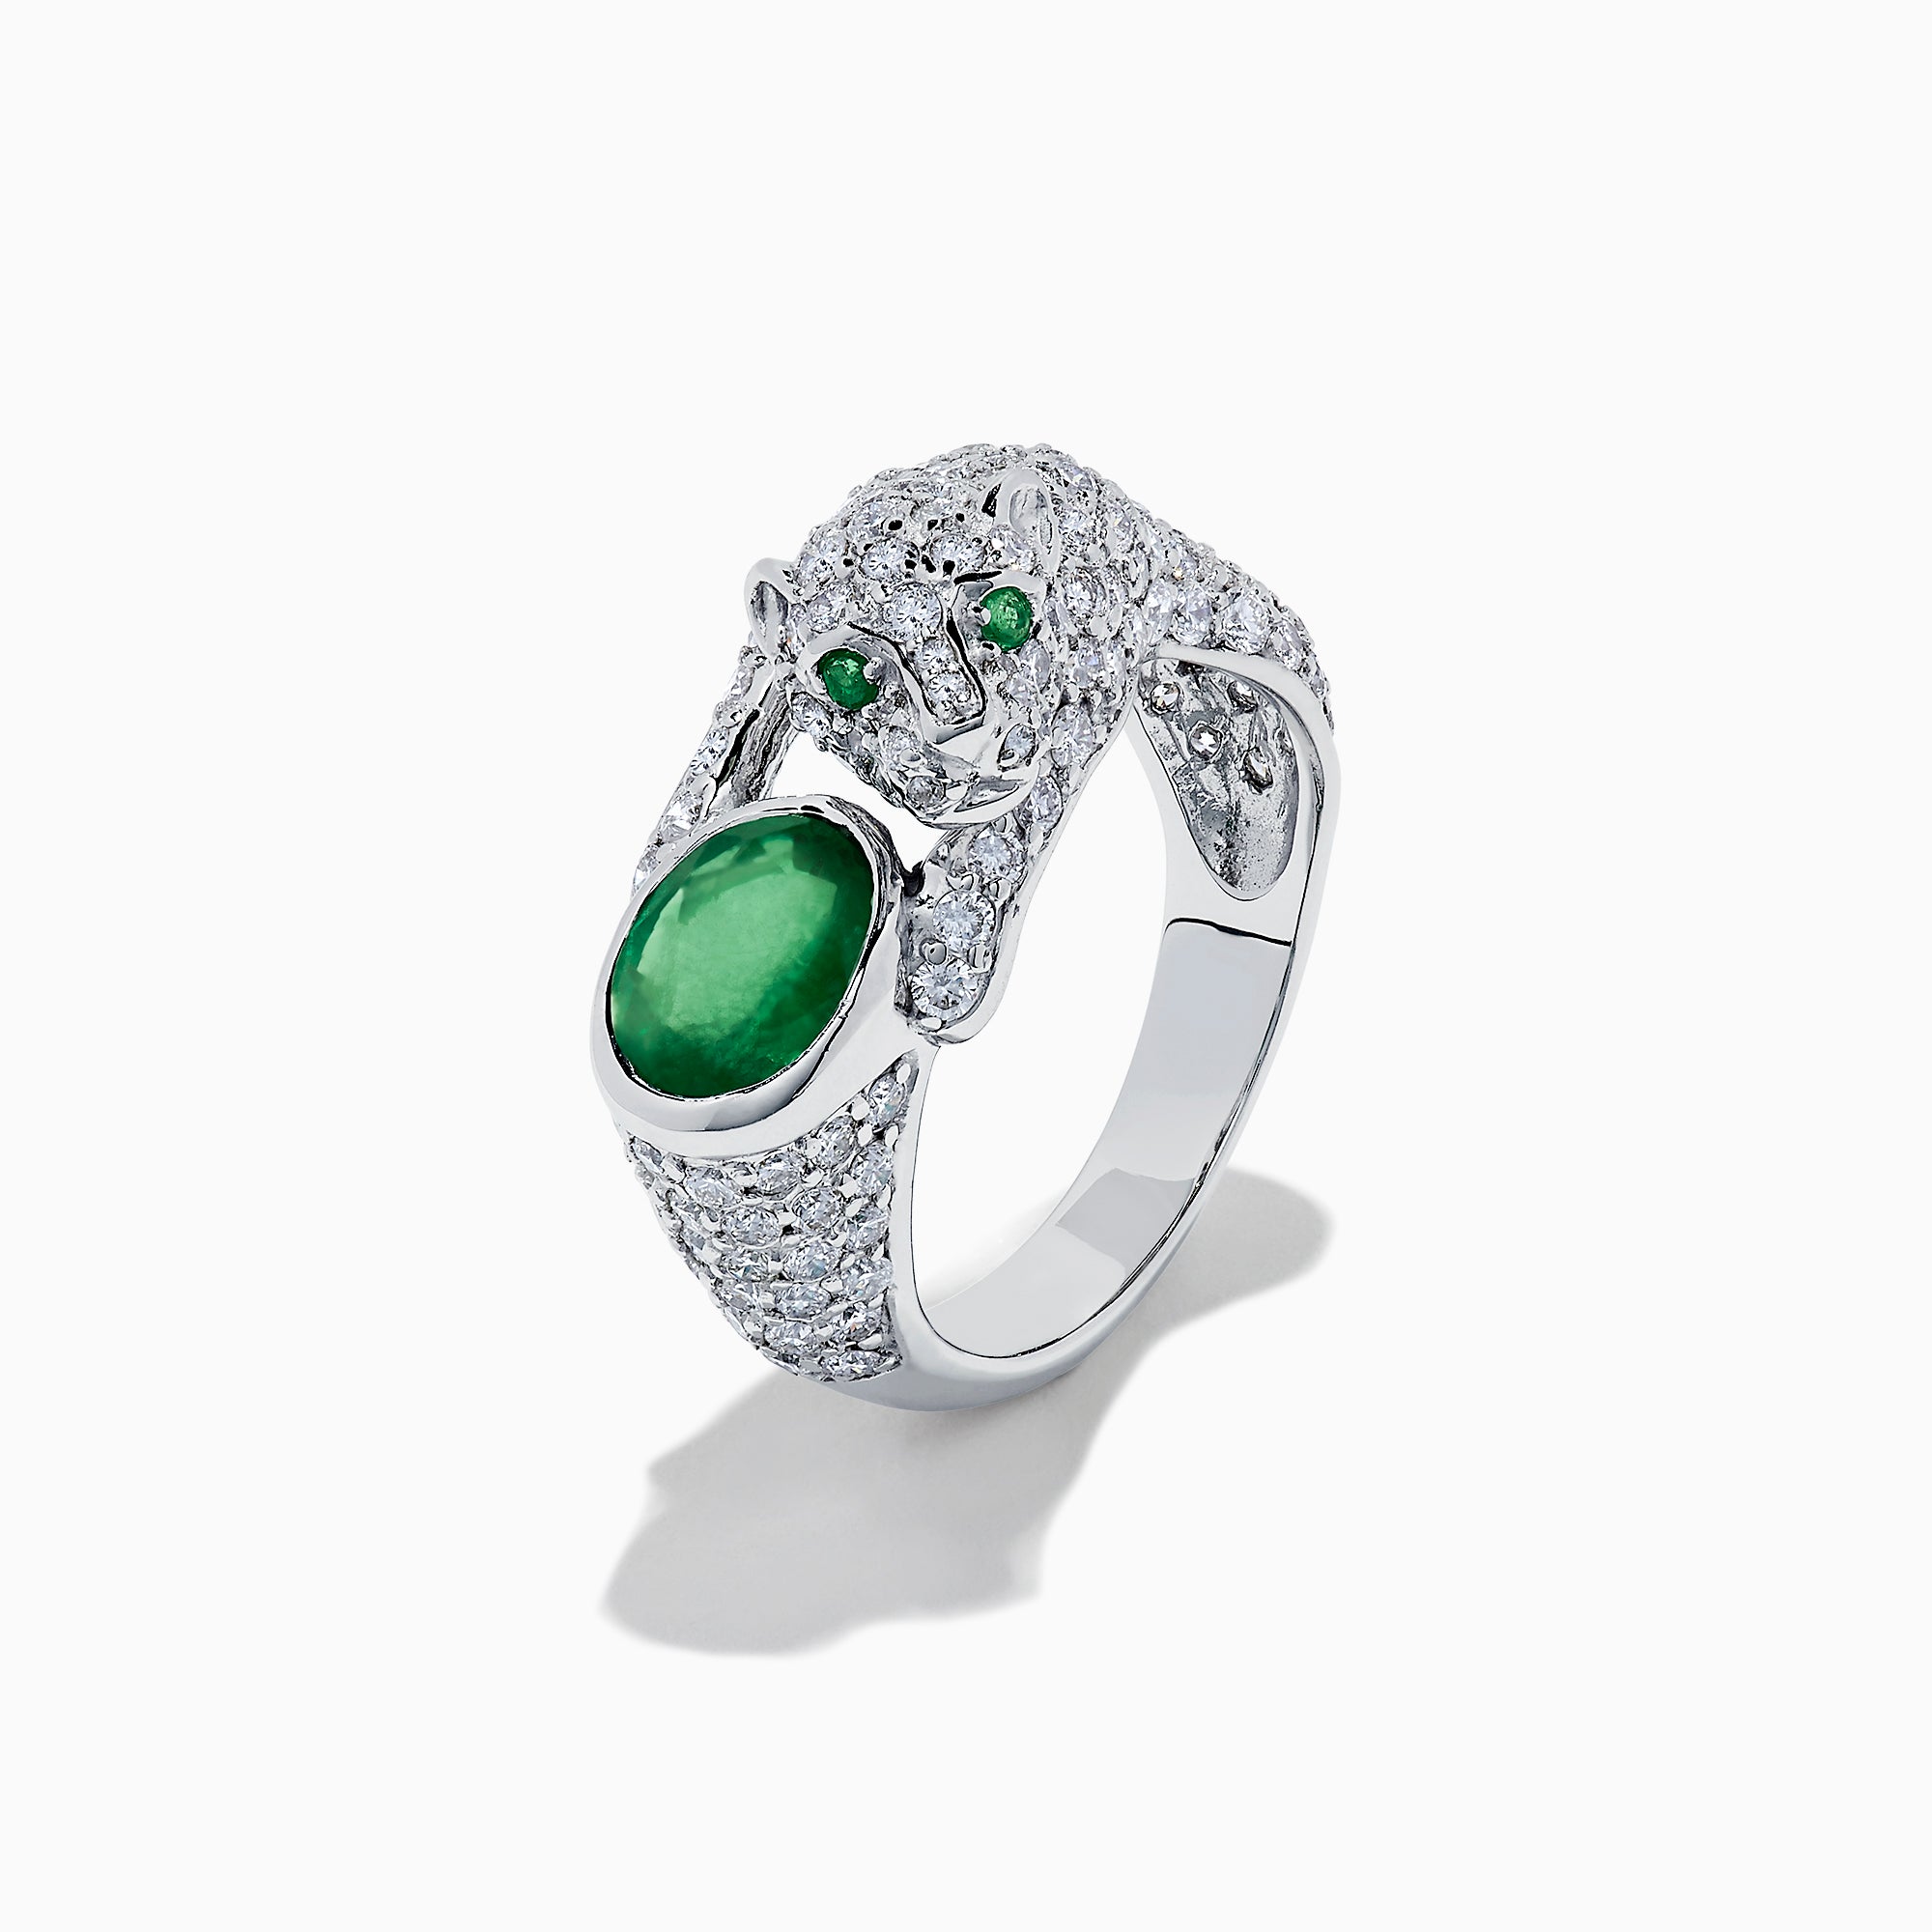 Effy Signature 14K White Gold Emerald and Diamond Panther Ring, 3.70 TCW